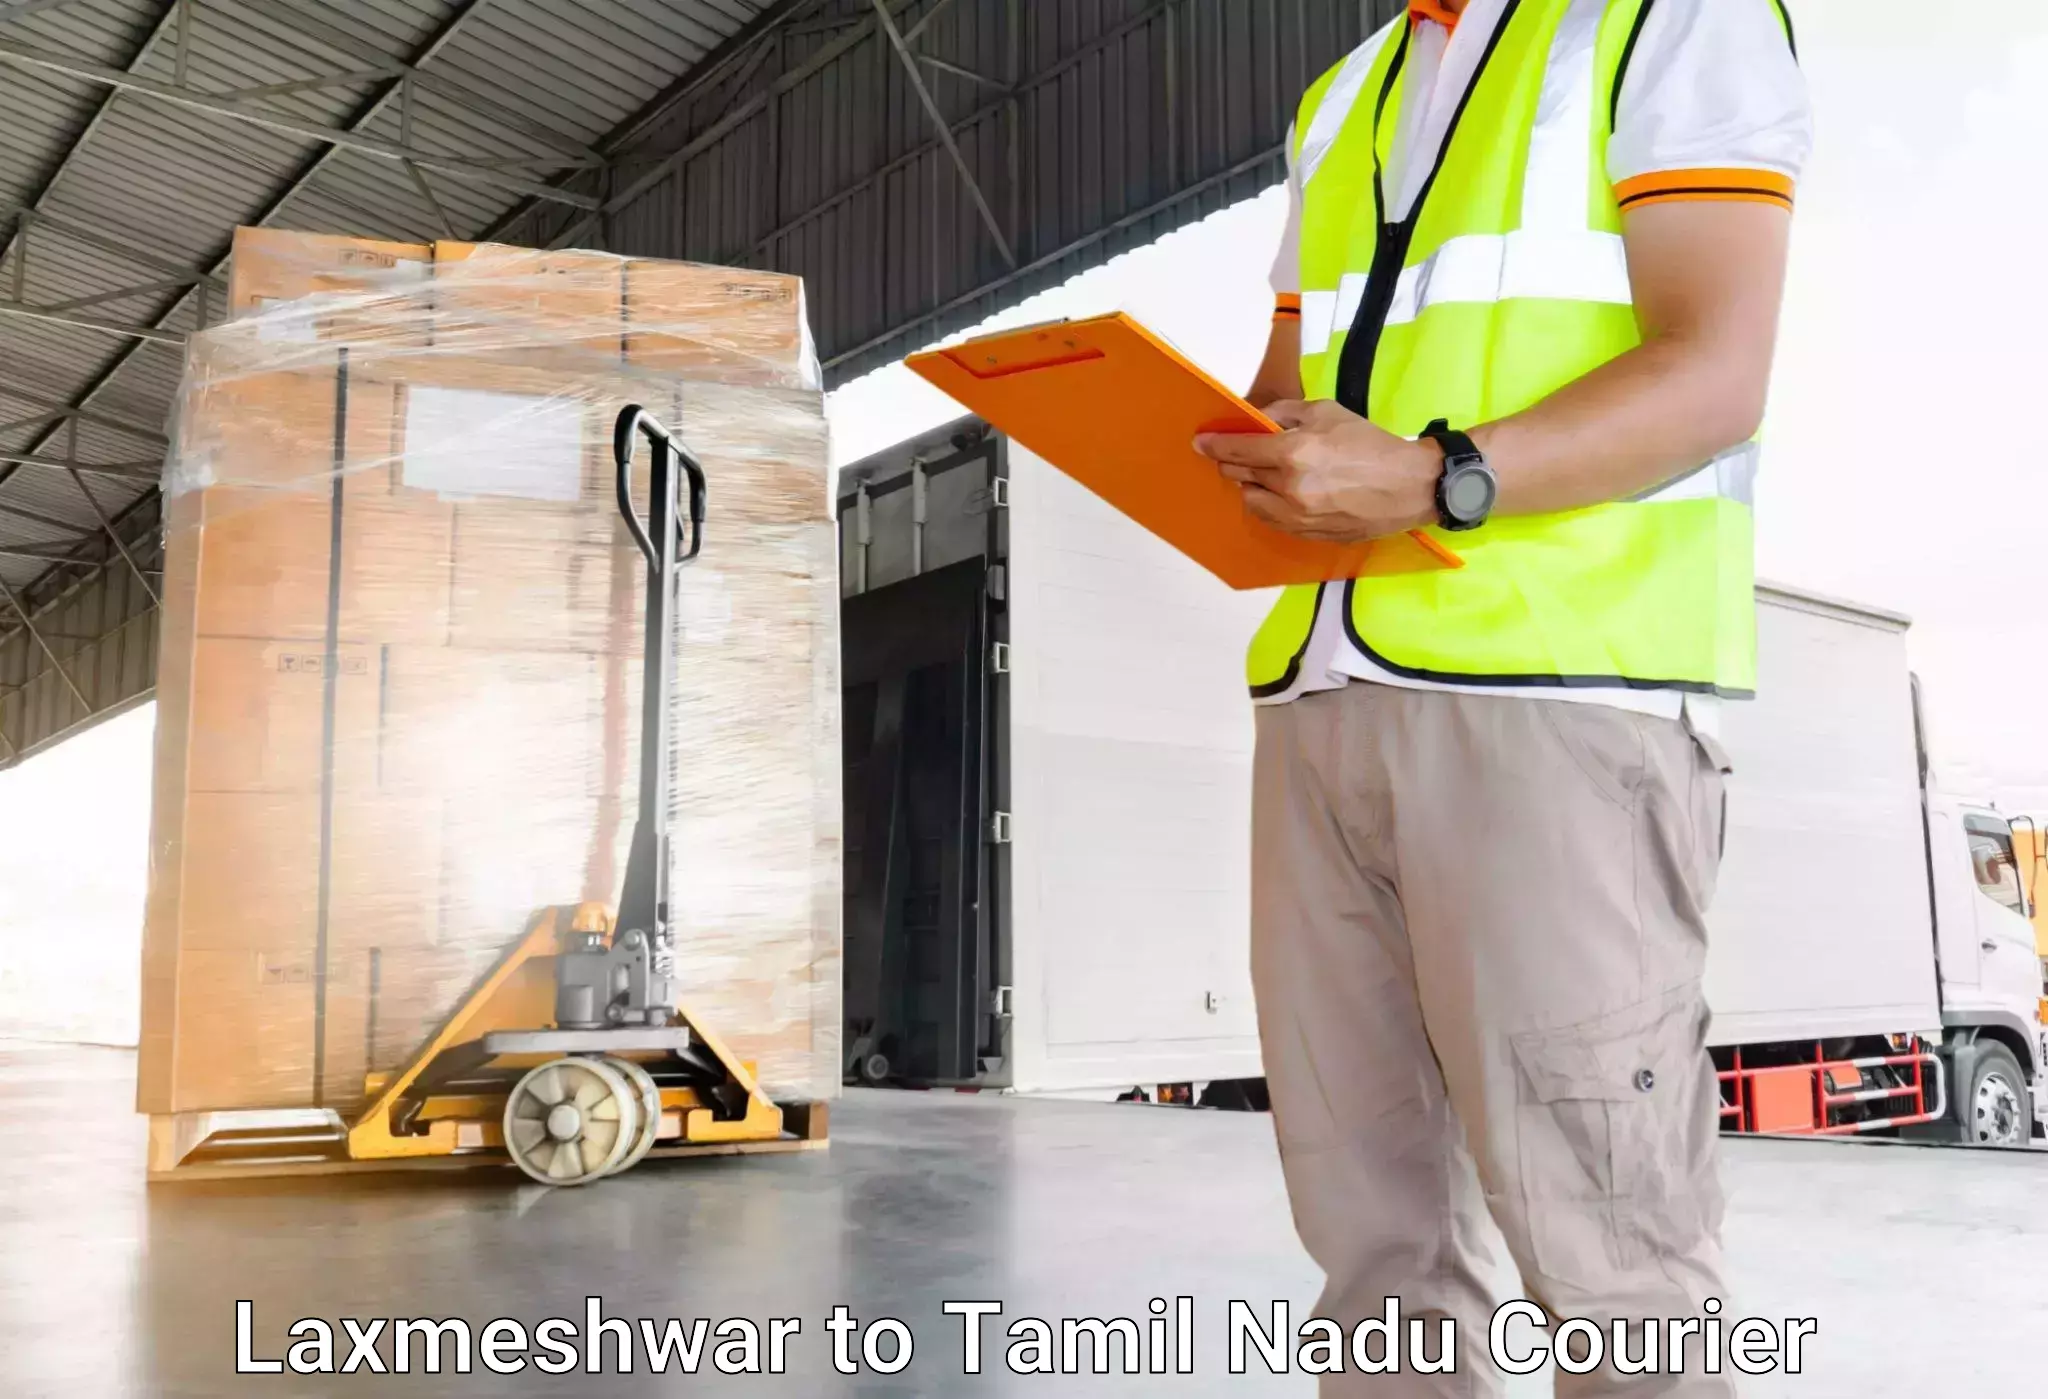 Luggage shipment specialists in Laxmeshwar to Chinnasalem